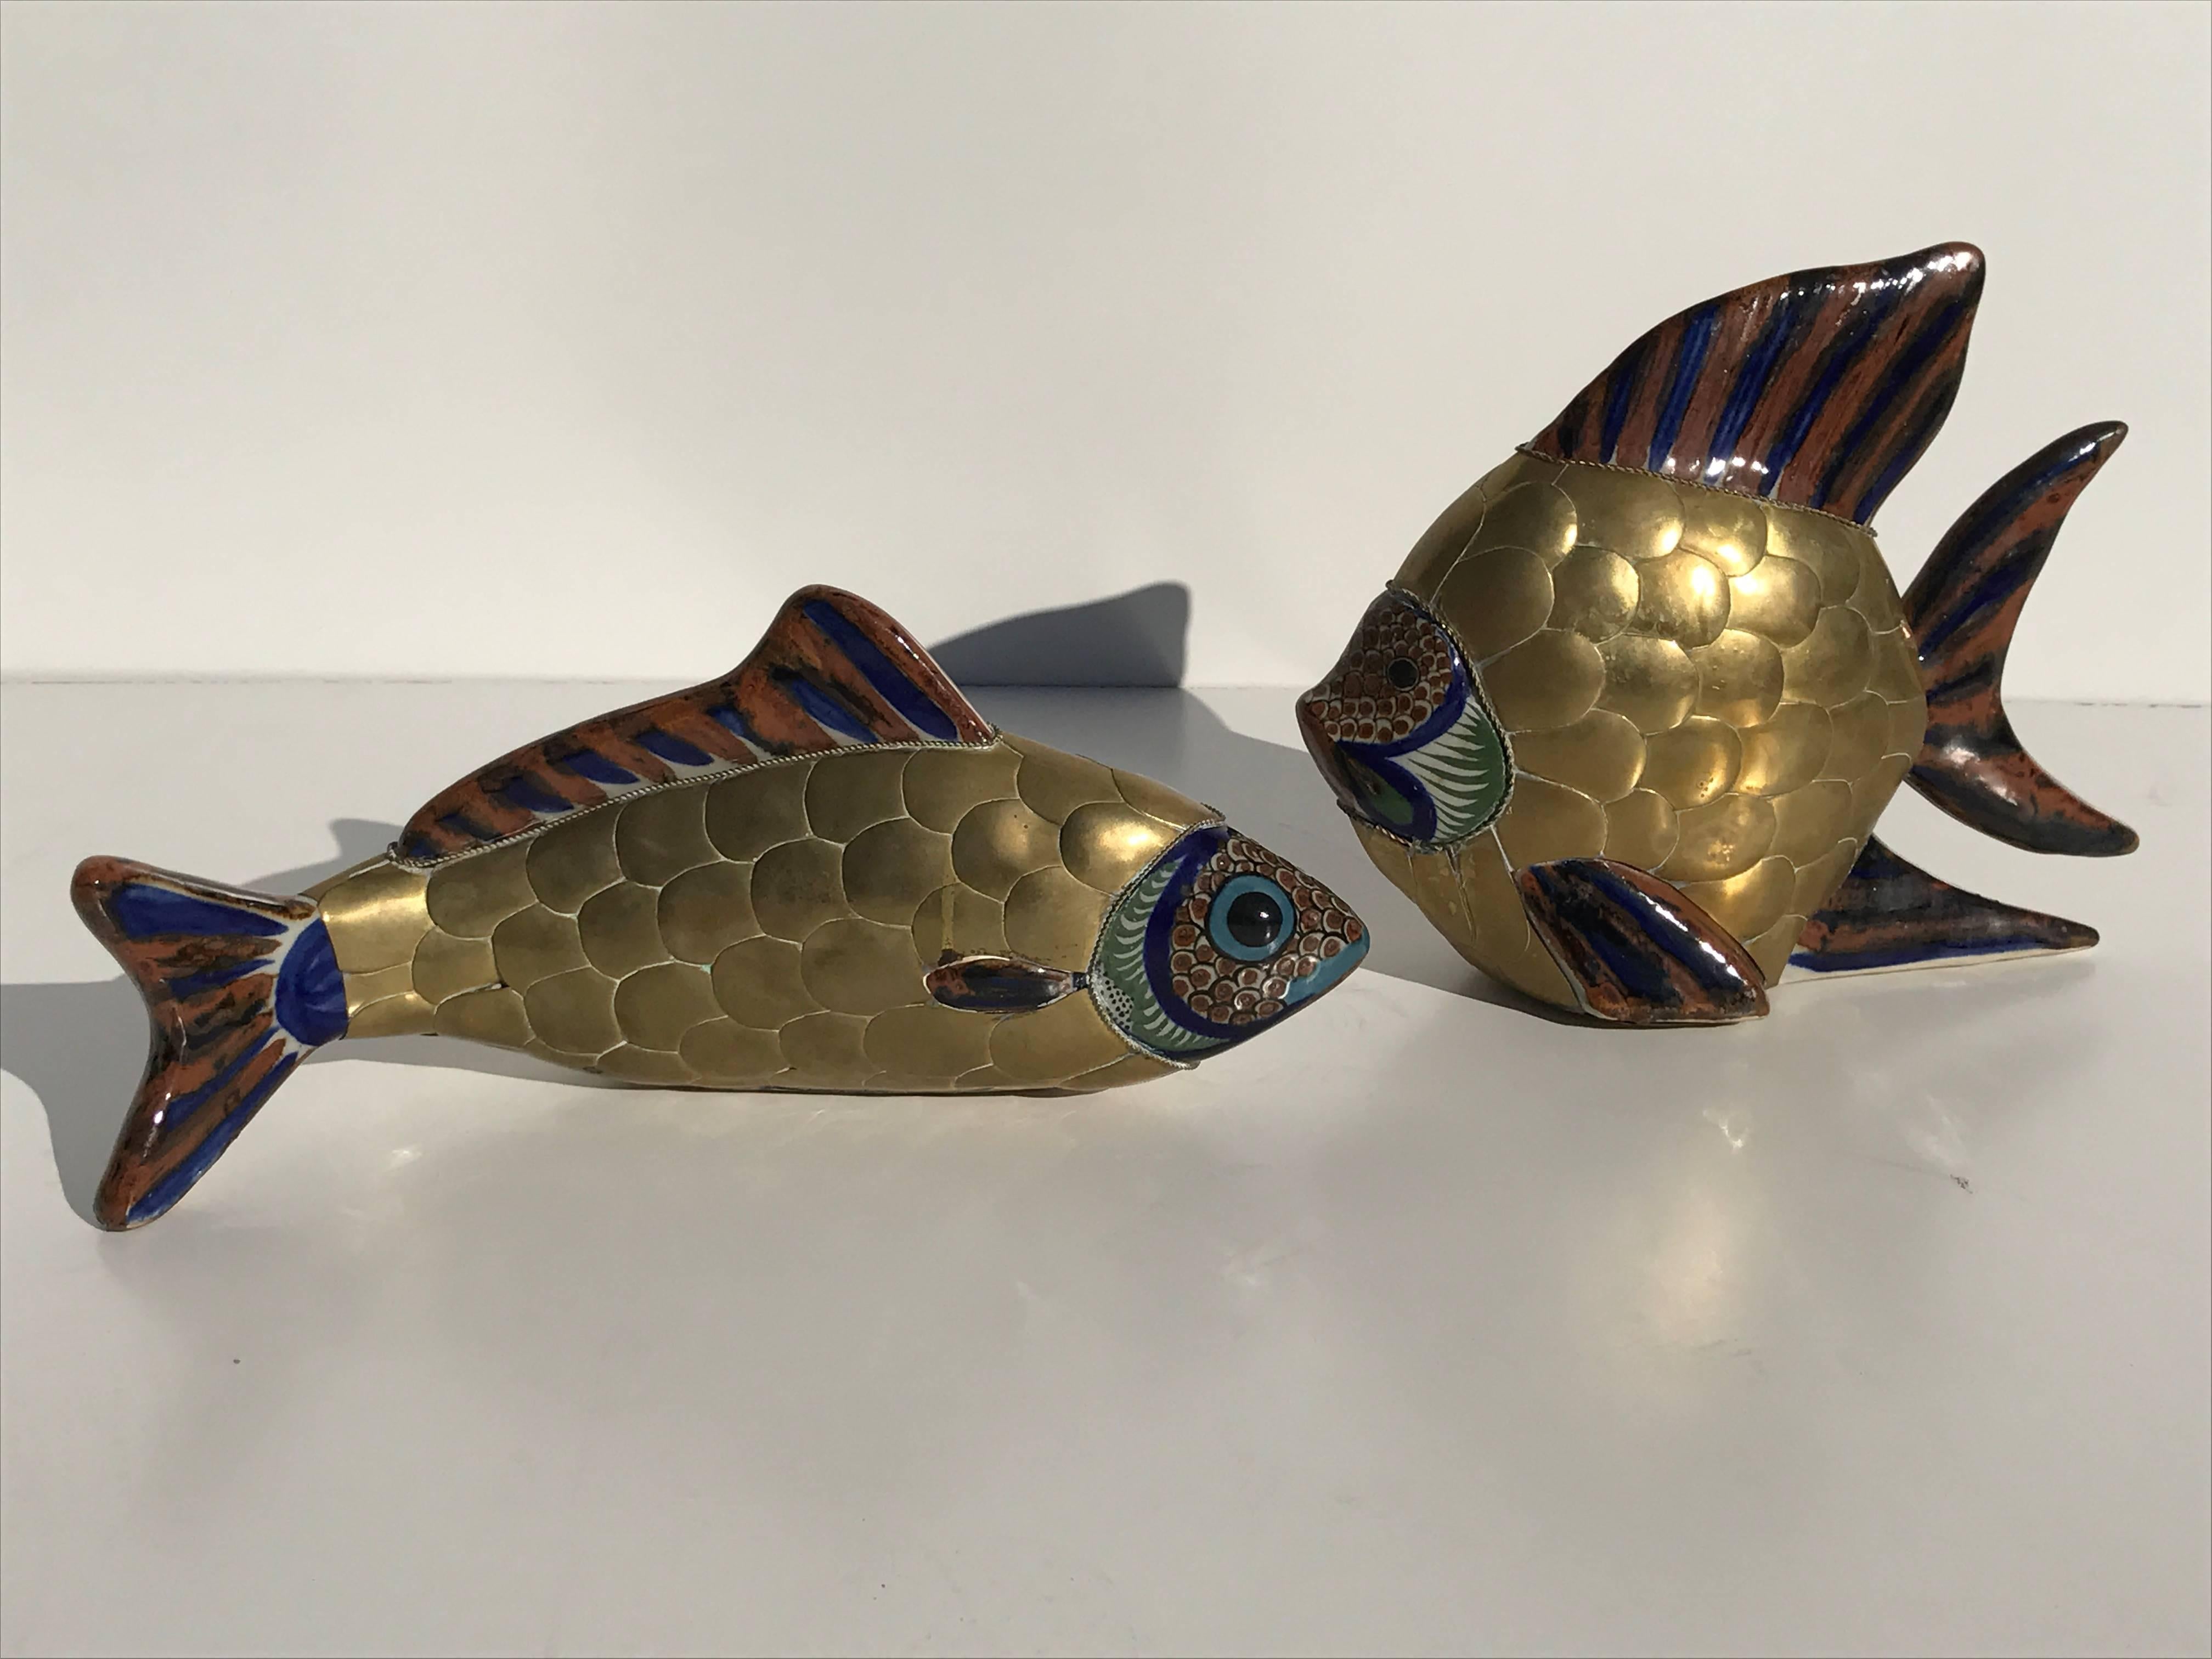 Pair of brass and ceramic fish sculptures attributed to Sergio Bustamante.
Measures: Large fish is 11